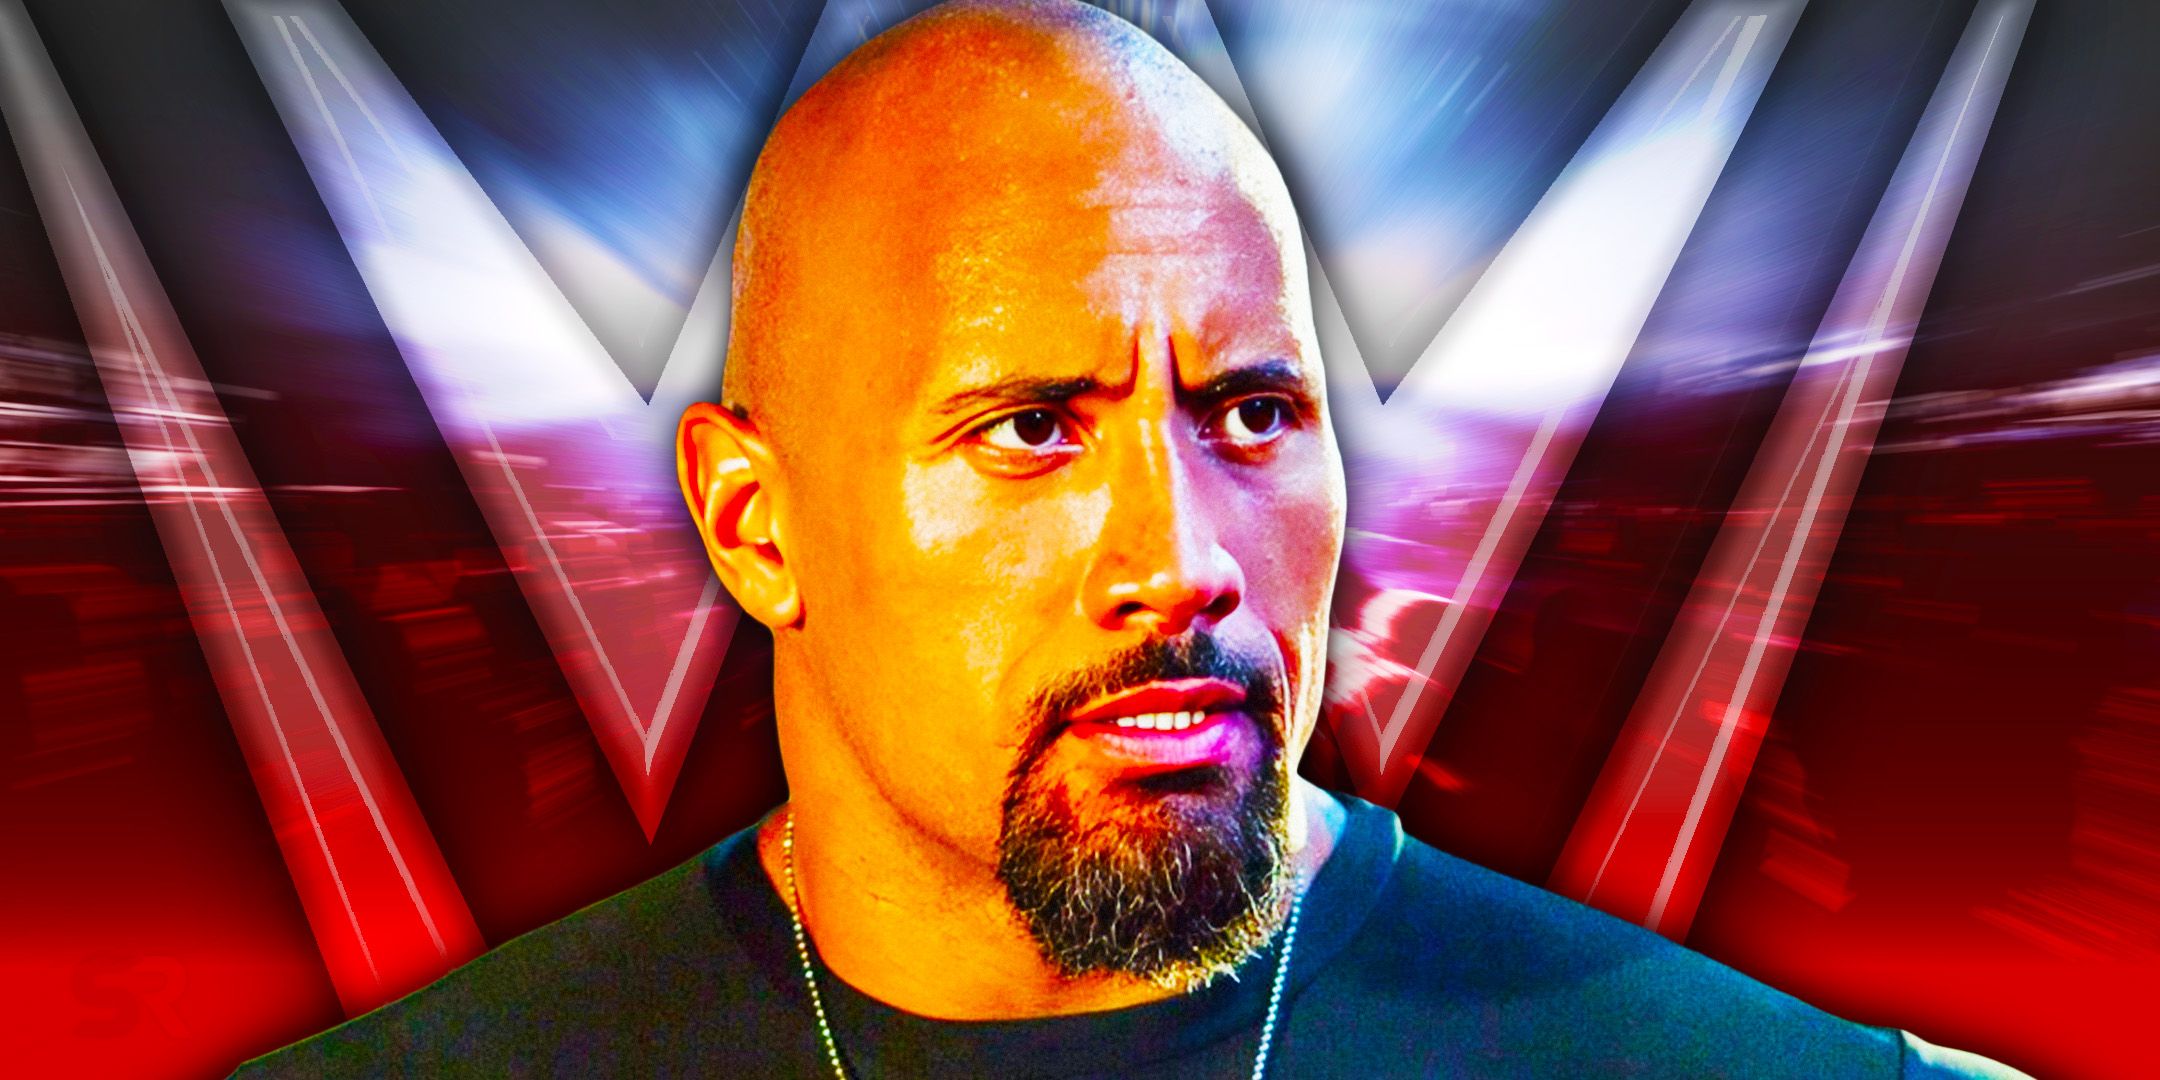 The Rock as Luke Hobbs in Fast & Furious in front of a WWE logo